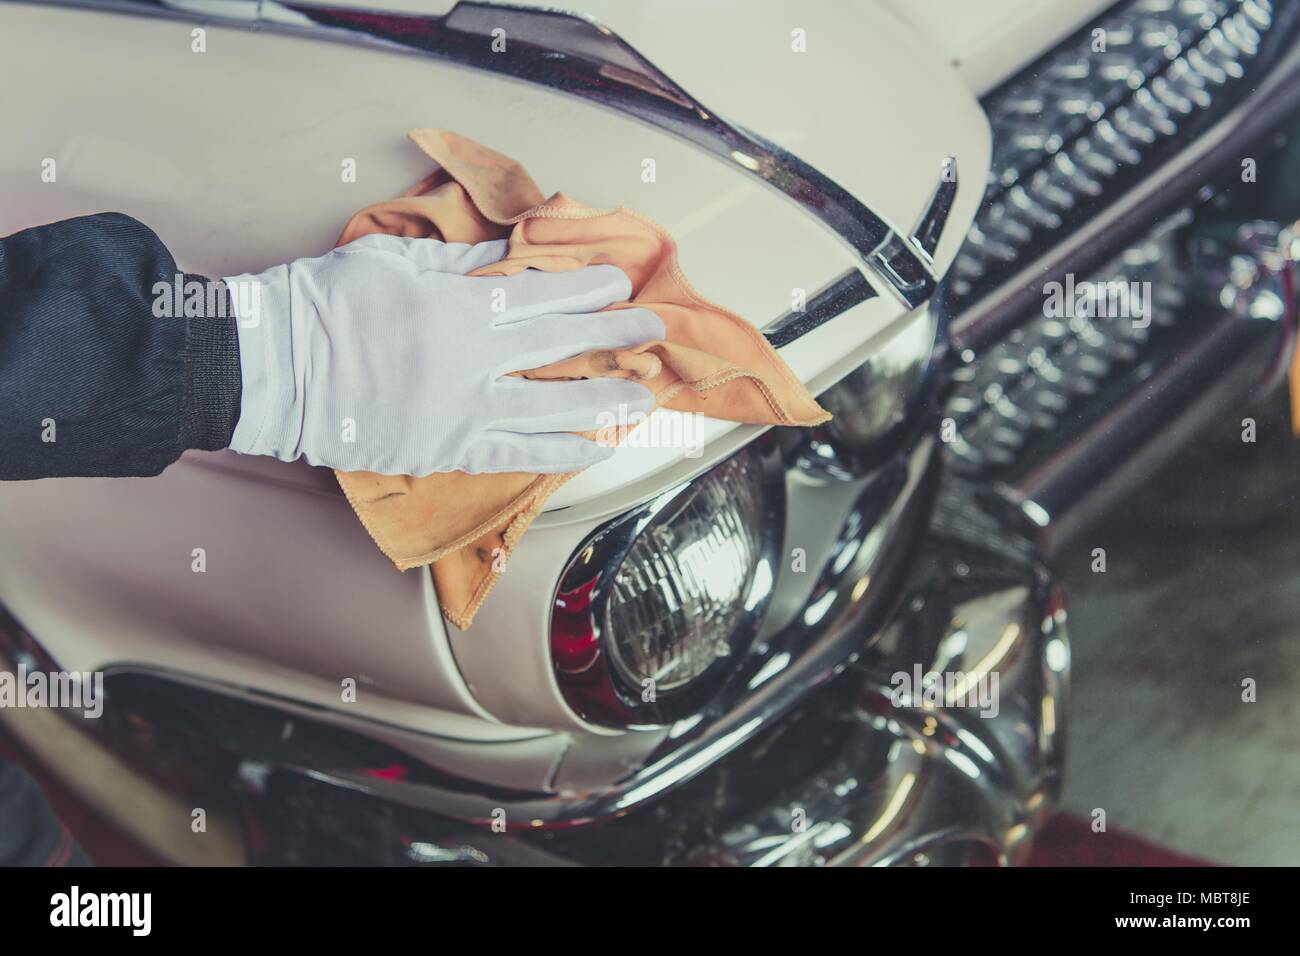 Taking Care of Classic Car. Passionate Vintage Cars Collector Cleaning One of His Vehicle. Closeup Photo. Stock Photo